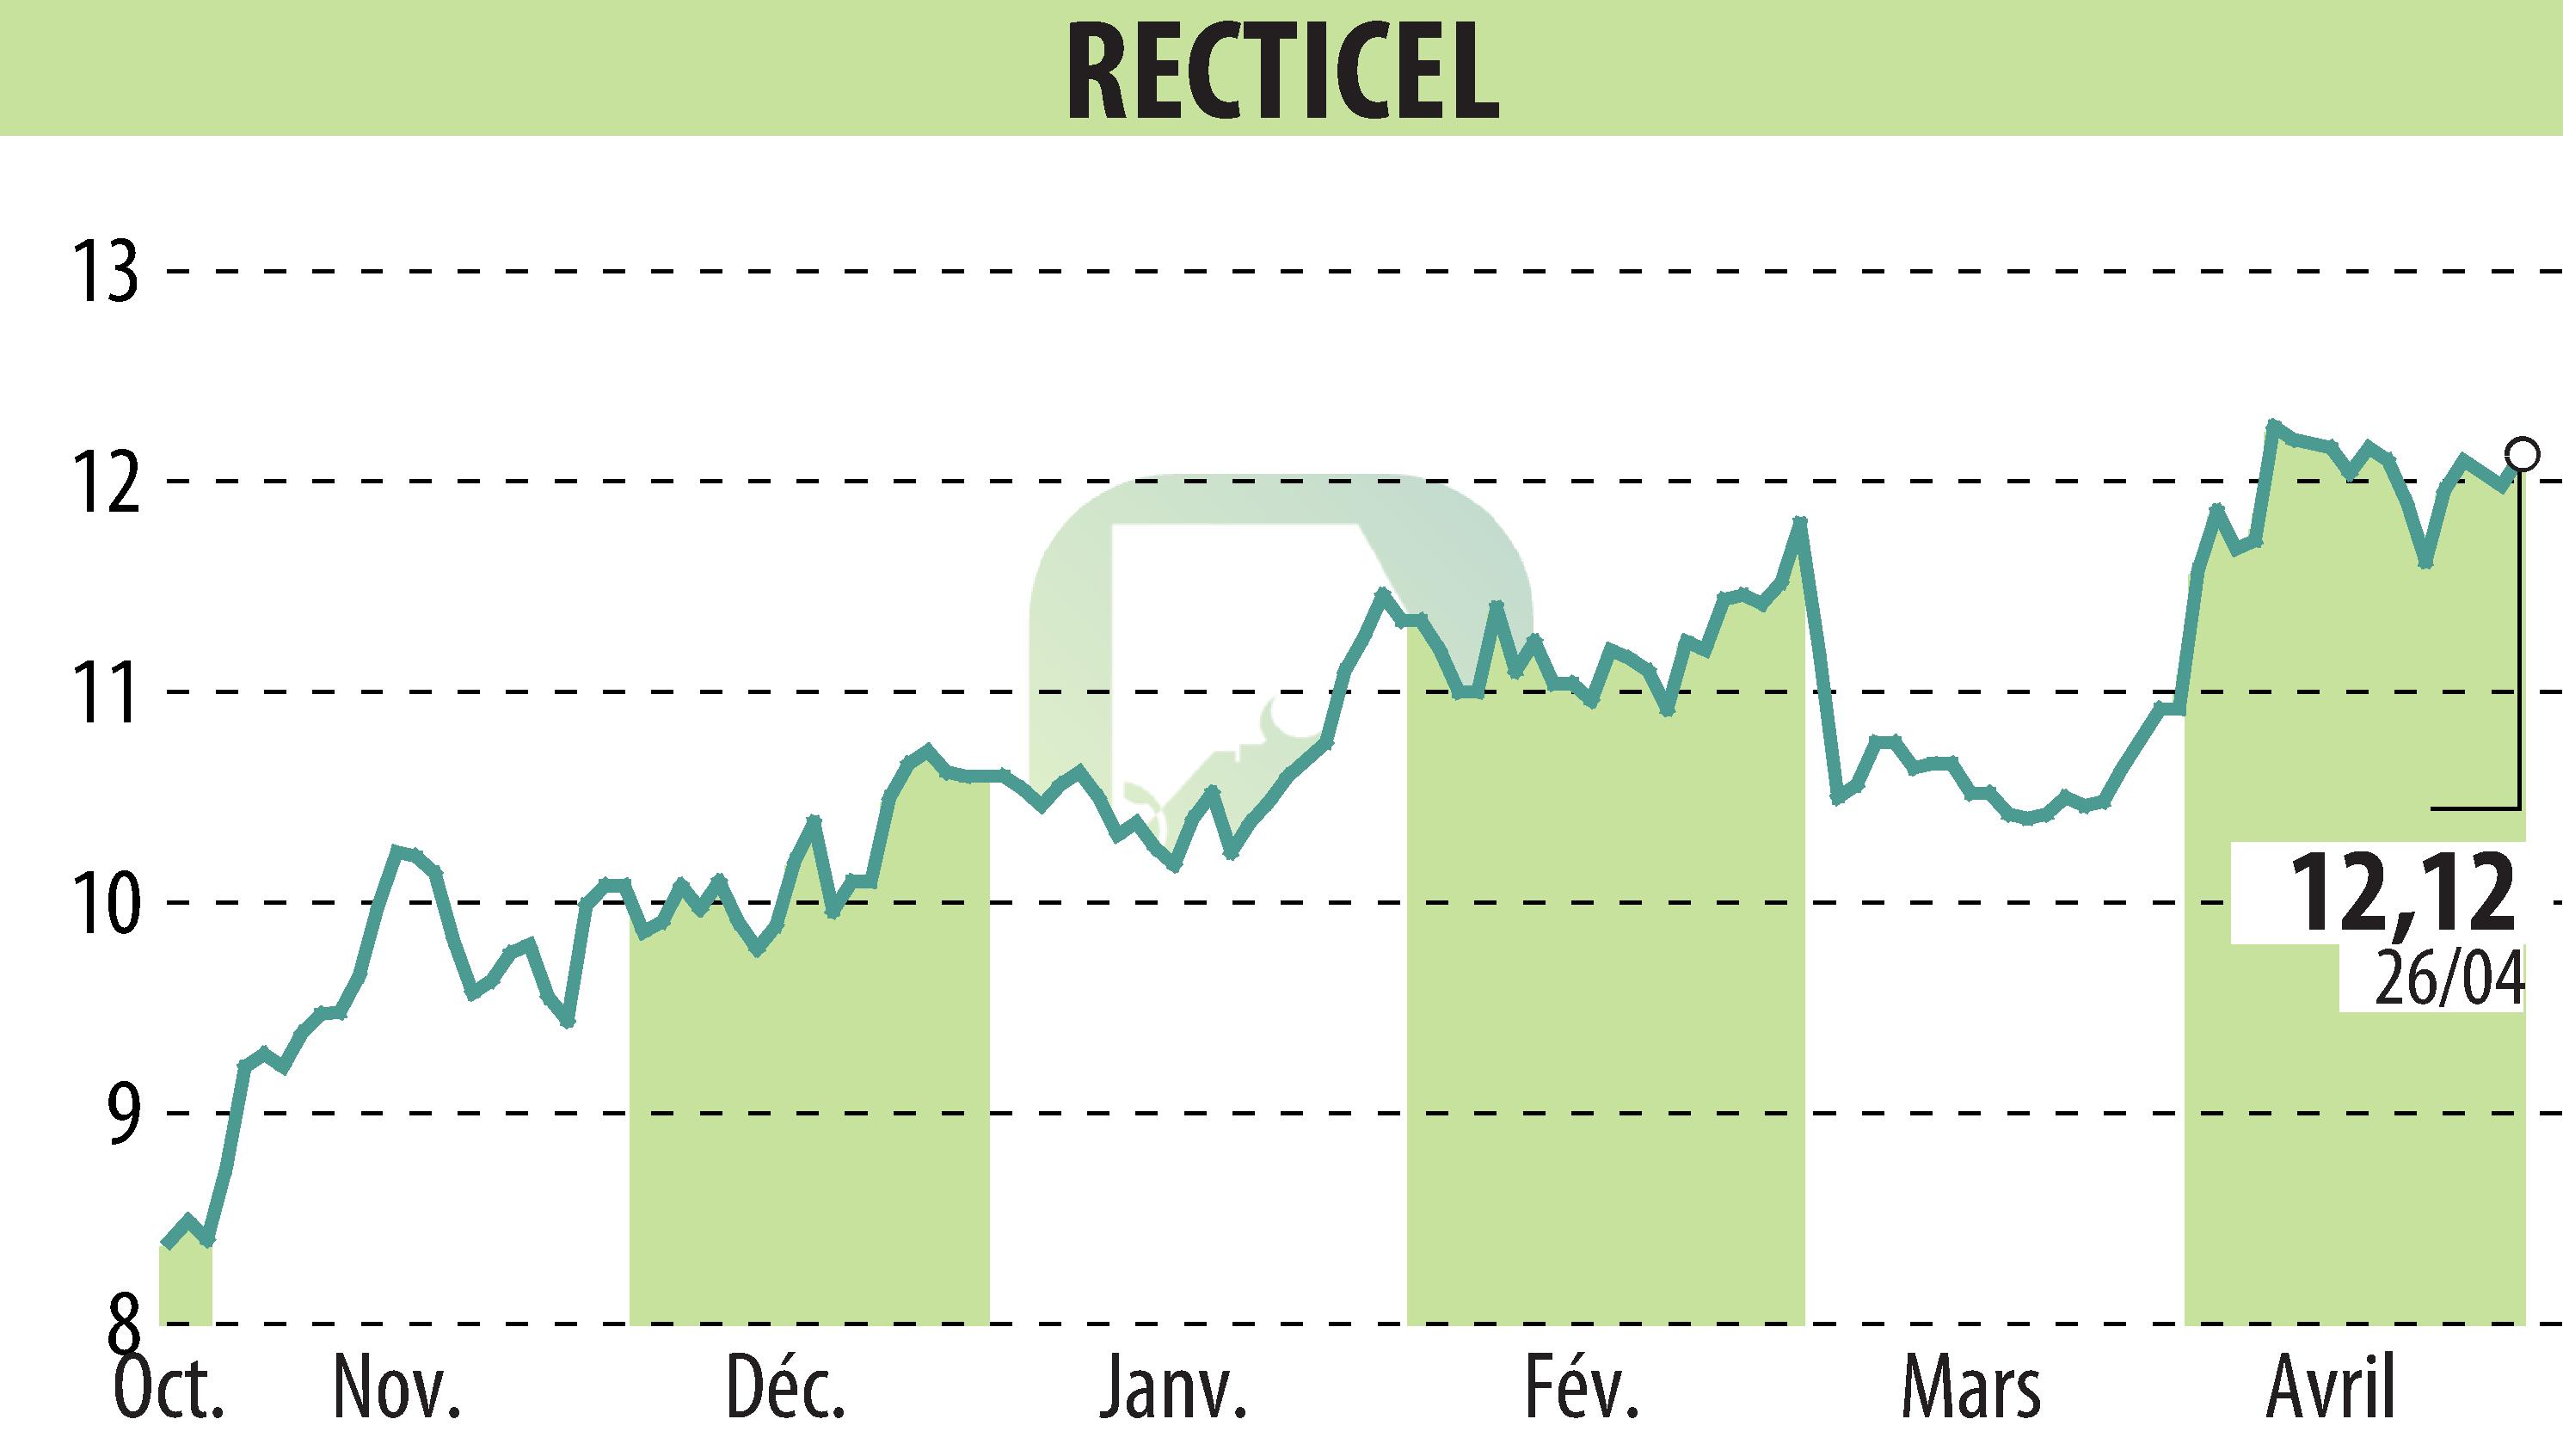 Stock price chart of RECTICEL (EBR:RECT) showing fluctuations.